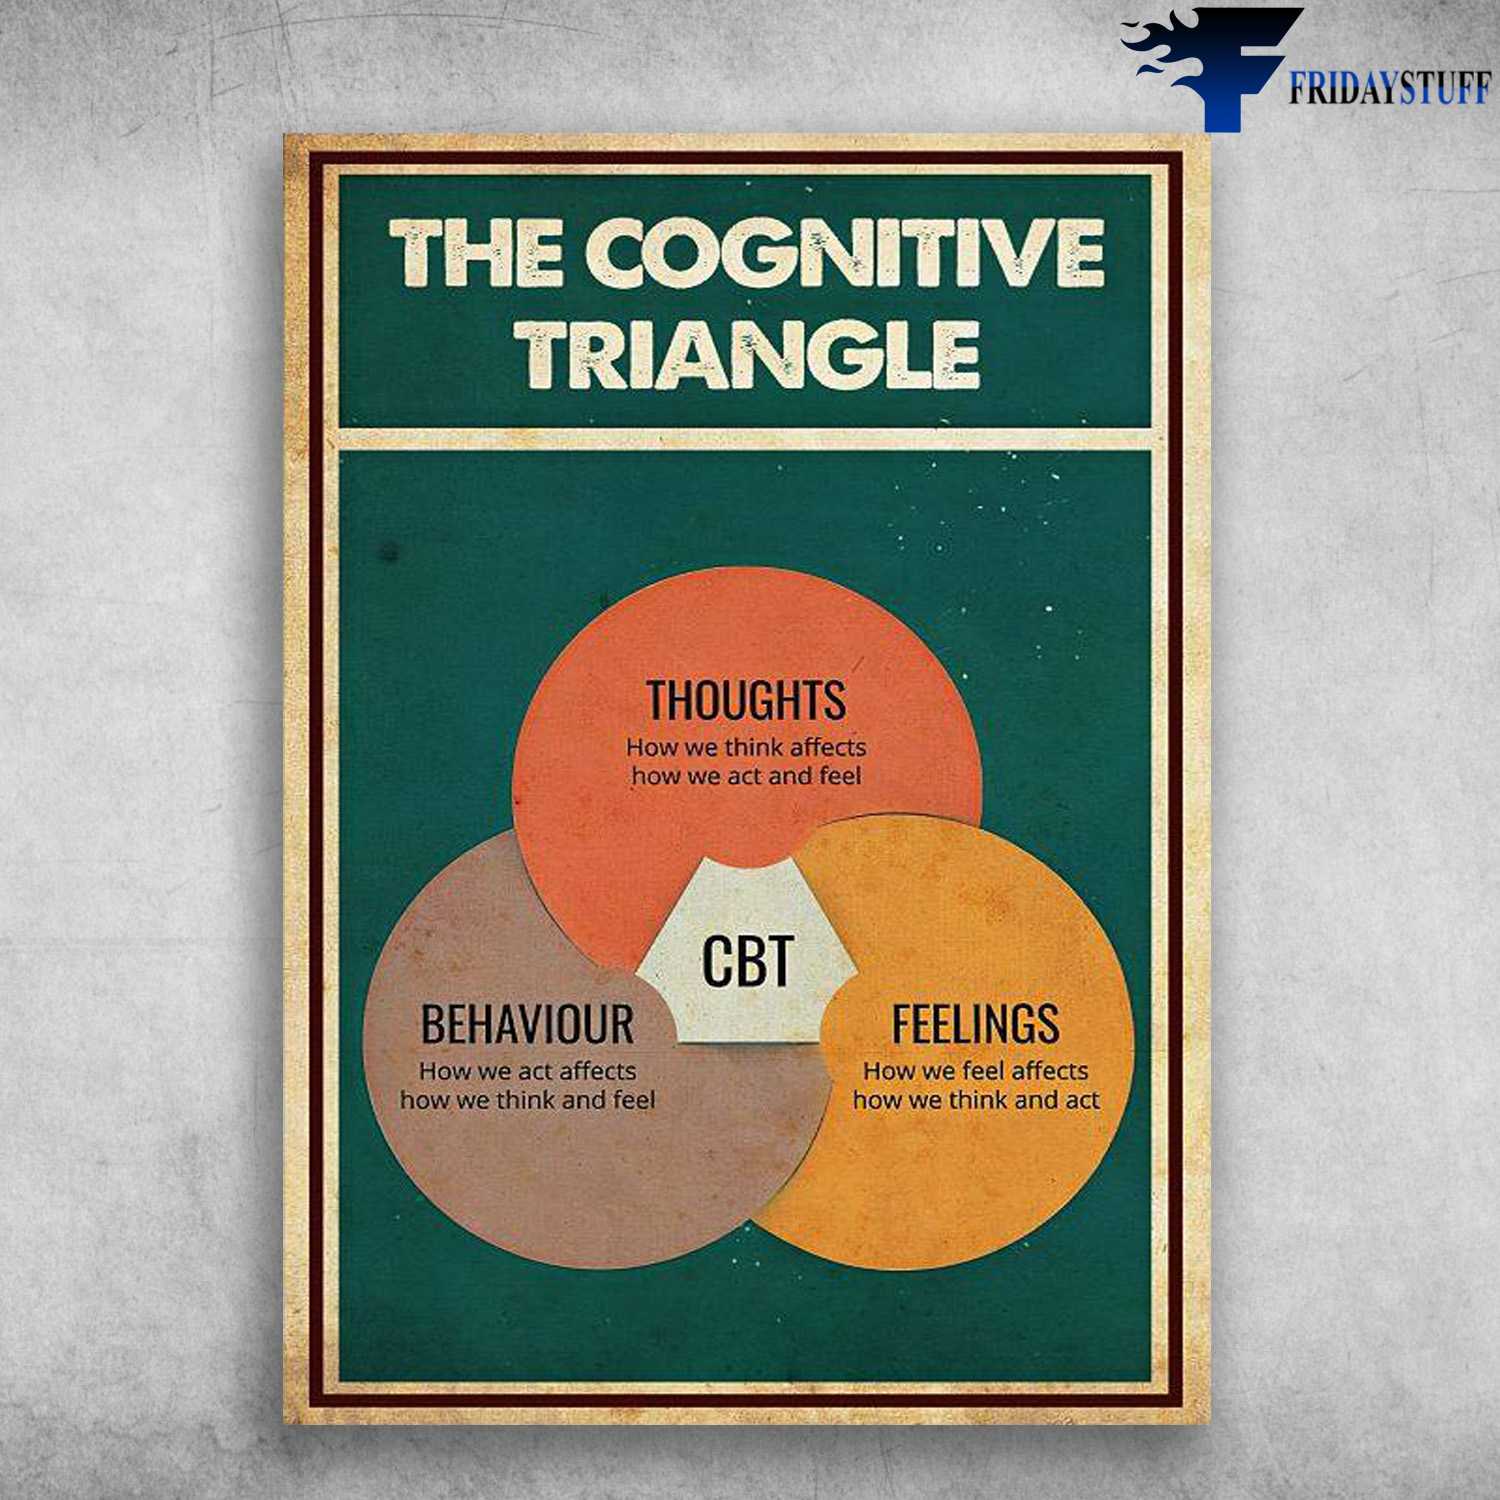 The Cognitive Triangle - Throughts How We Thing Affects, How We Act And Feel, Behaviour How We Act Affects, How We Think And Feel, Feelings How We Feel Affects, How We Think And Act